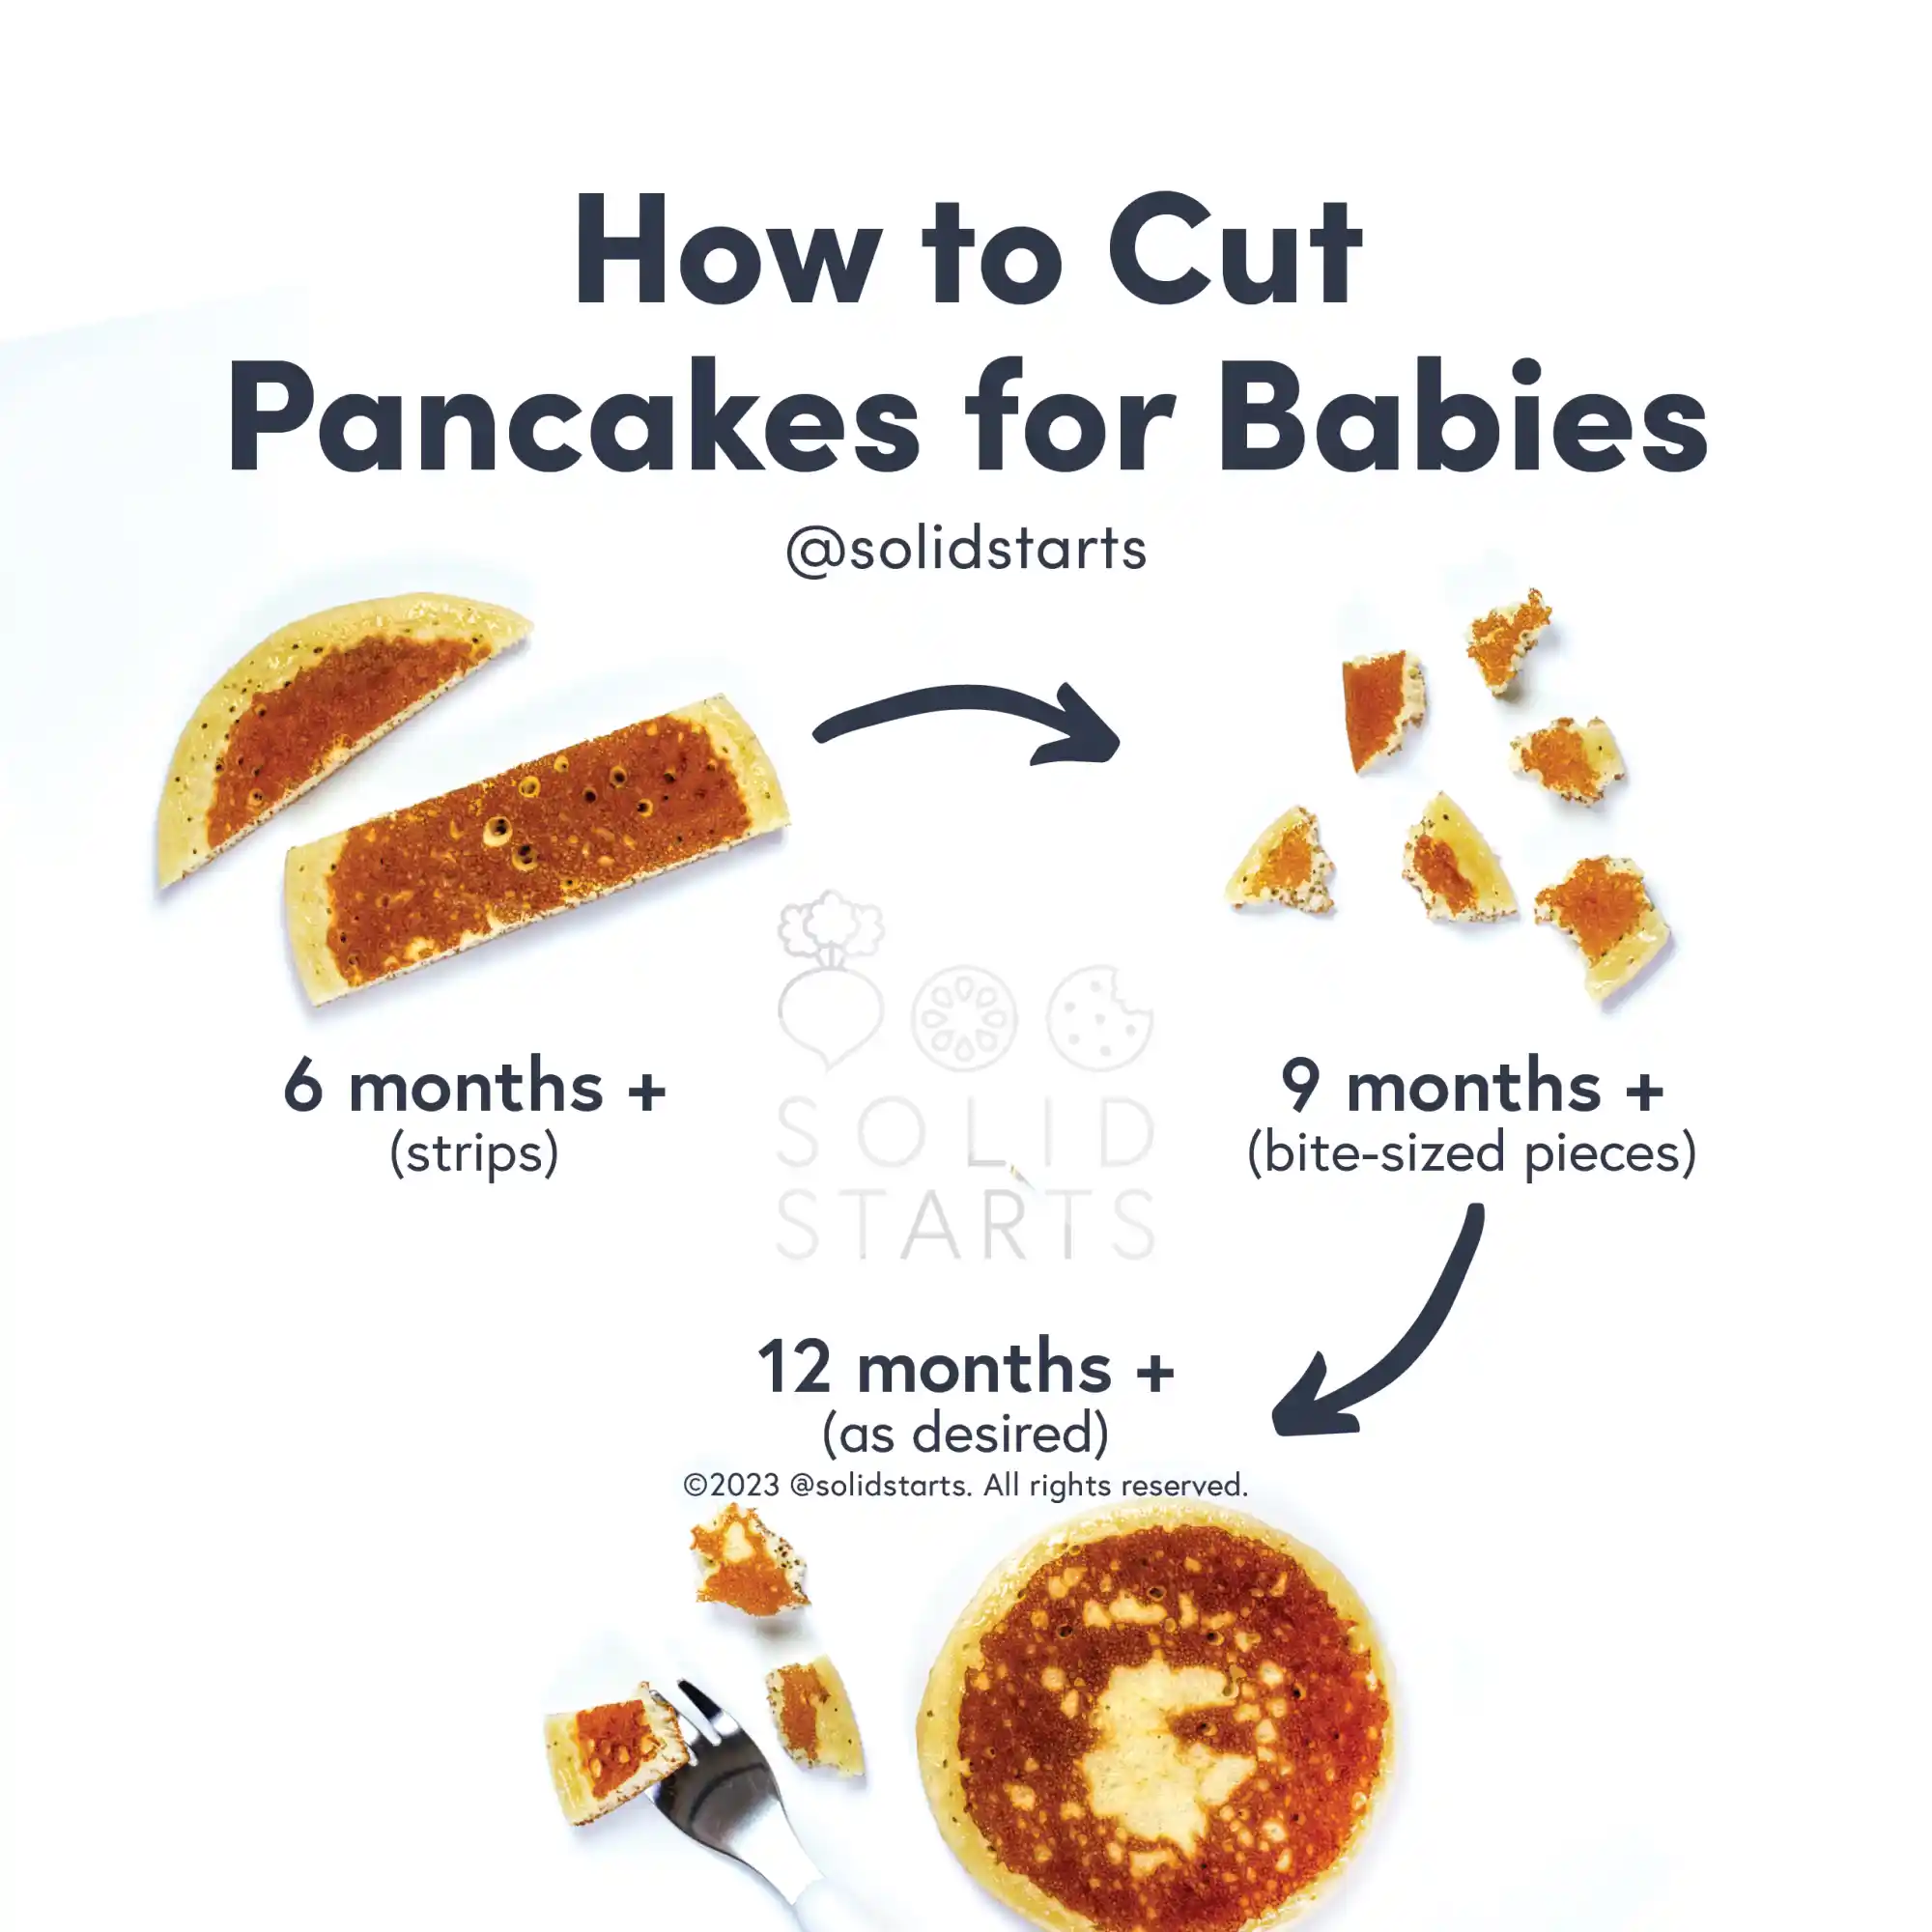 a Solid Starts infographic with the header How to Cut Pancakes for Babies: strips for babies 6 months+, bite-sized pieces for 9 months+, whole or bite-sized pieces with utensil for 12 months+